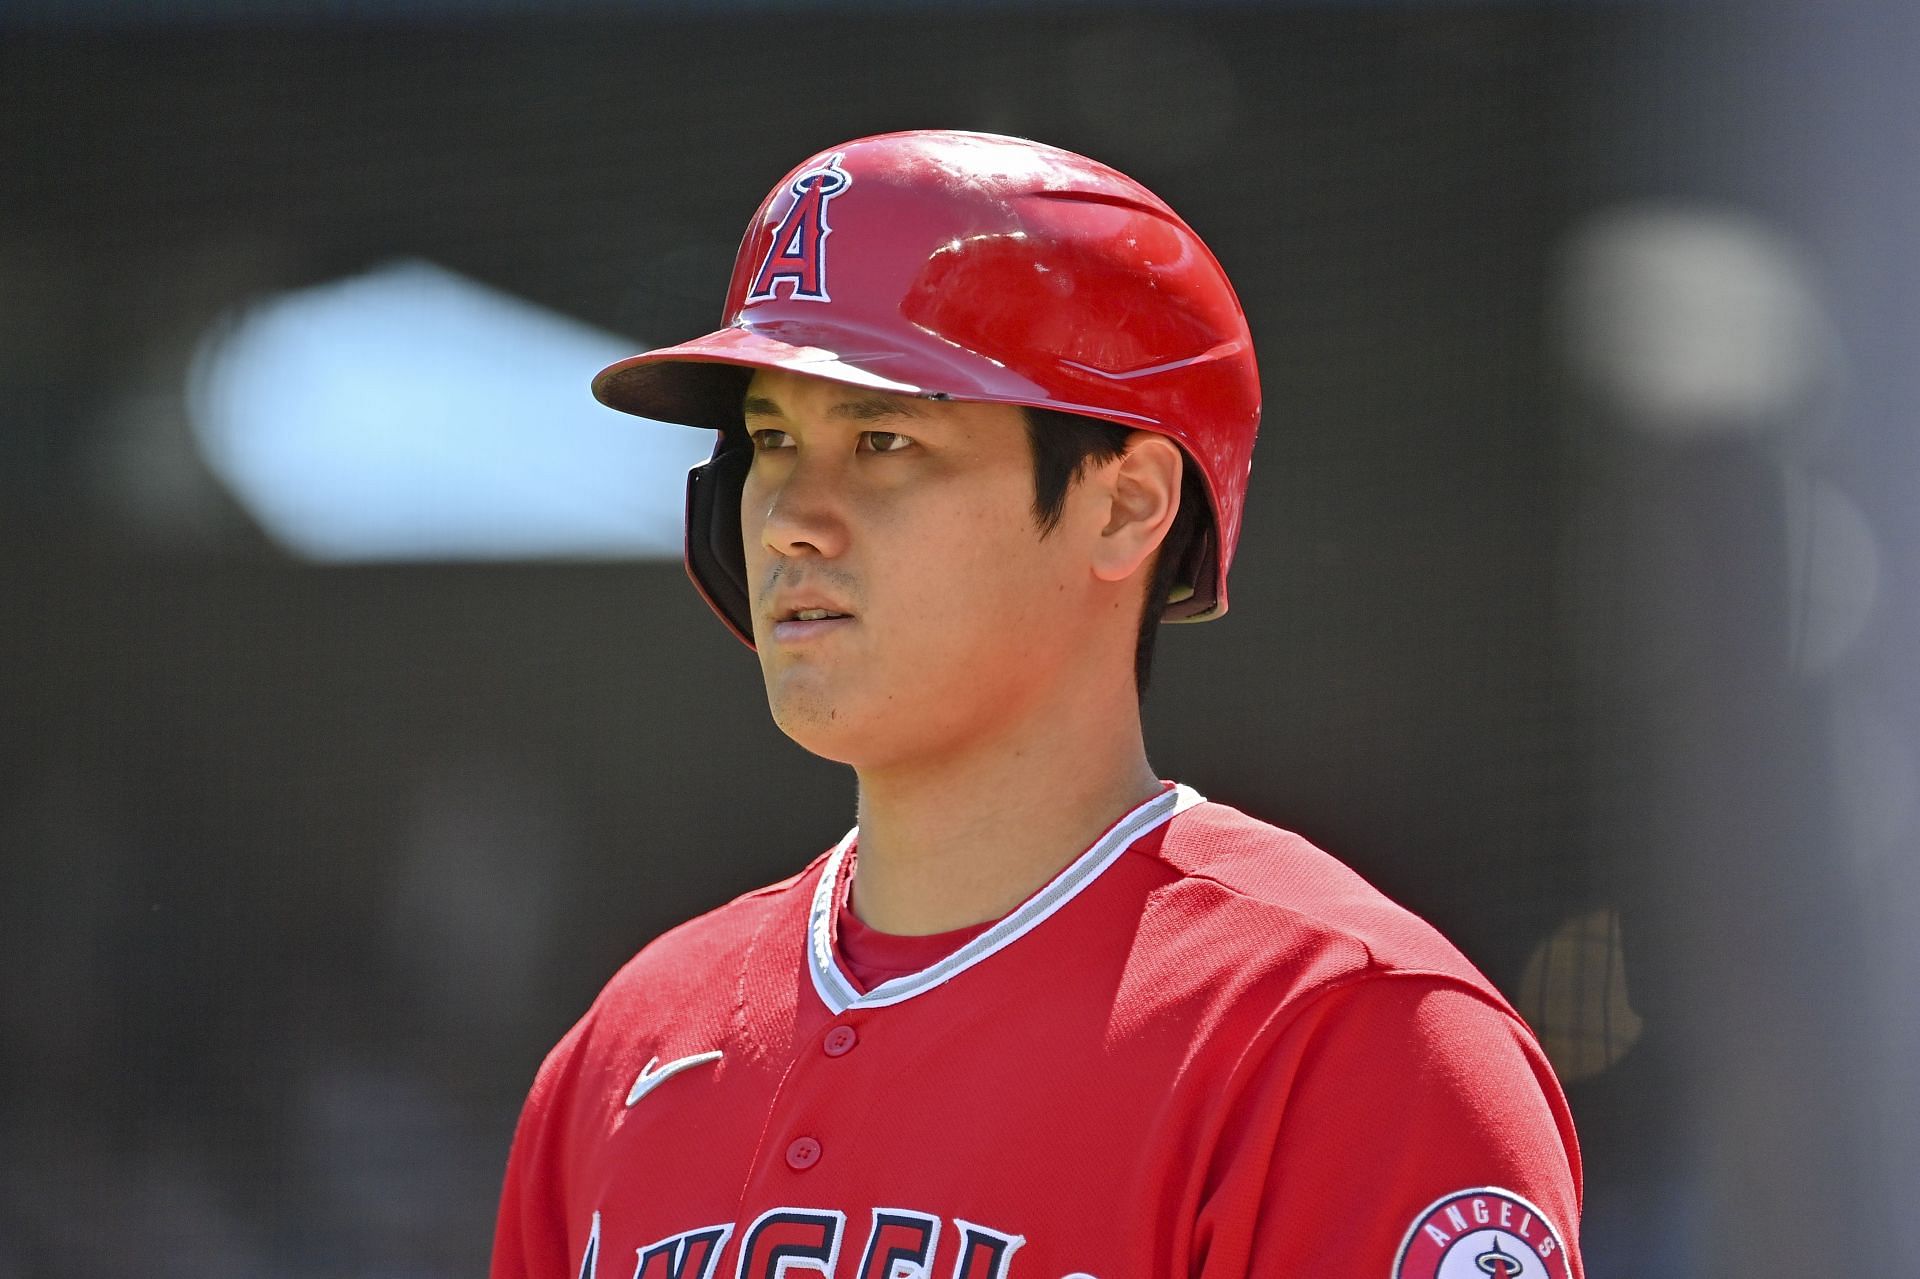 MLB insider says Shohei Ohtani could receive as much as 50 million a